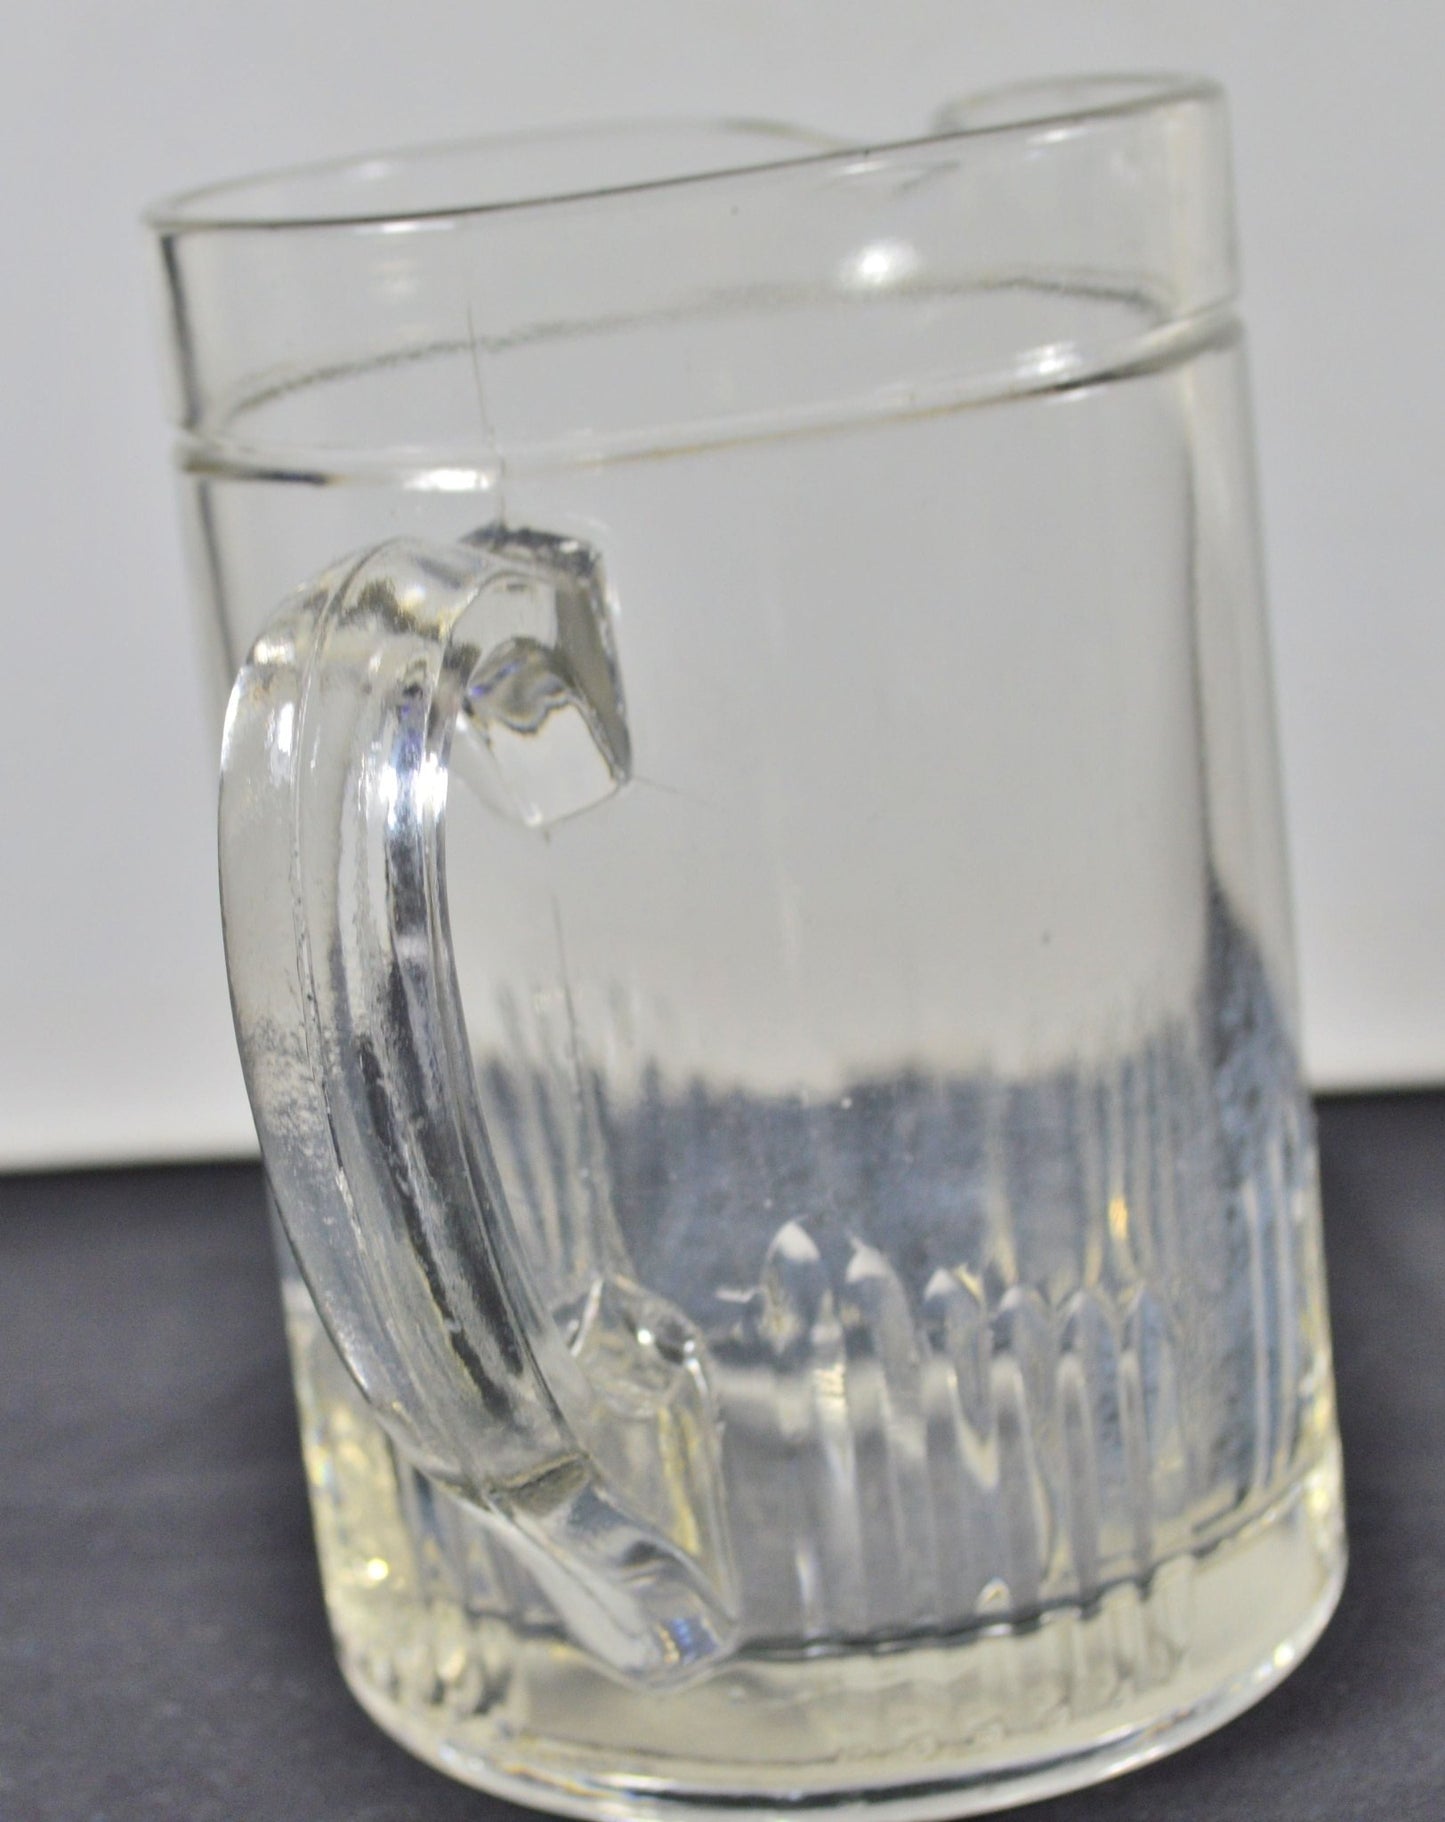 TABLEWARE GLASS JUG(PREVIOUSLY OWNED)FAIRLY GOOD CONDITION - TMD167207